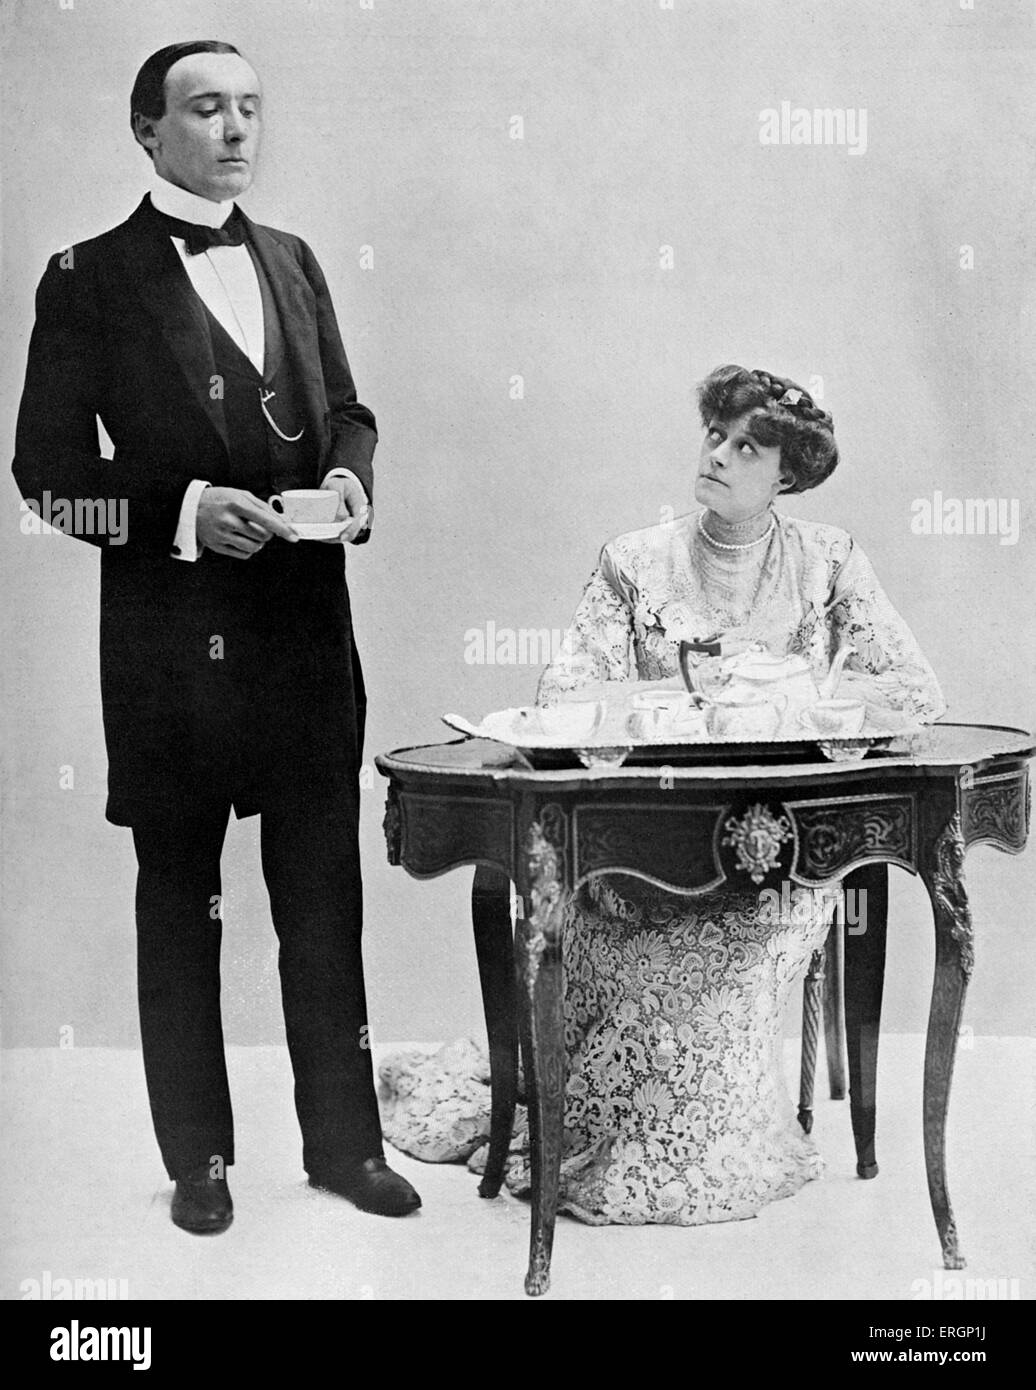 J M Barrie 'The Admirable Crichton', comedy written in 1902. Harry Brodribb Irving as Crichton and Dame Irene Vanbrugh as Lady Mary. Crichton: - I am ashamed to be seen talking to you, my lady. Lady Mary: - To such a perfect servant as you, all this must be most distasteful.Play Pictorial photograph. JMB: Scottish novelist and playwright, 9 May 1860 – 19 June 1937. HBI: British actor, 5 August 1870 – 17 October 1919. IV: English actress, 2 December 1872 – 30 November 1949. Stock Photo